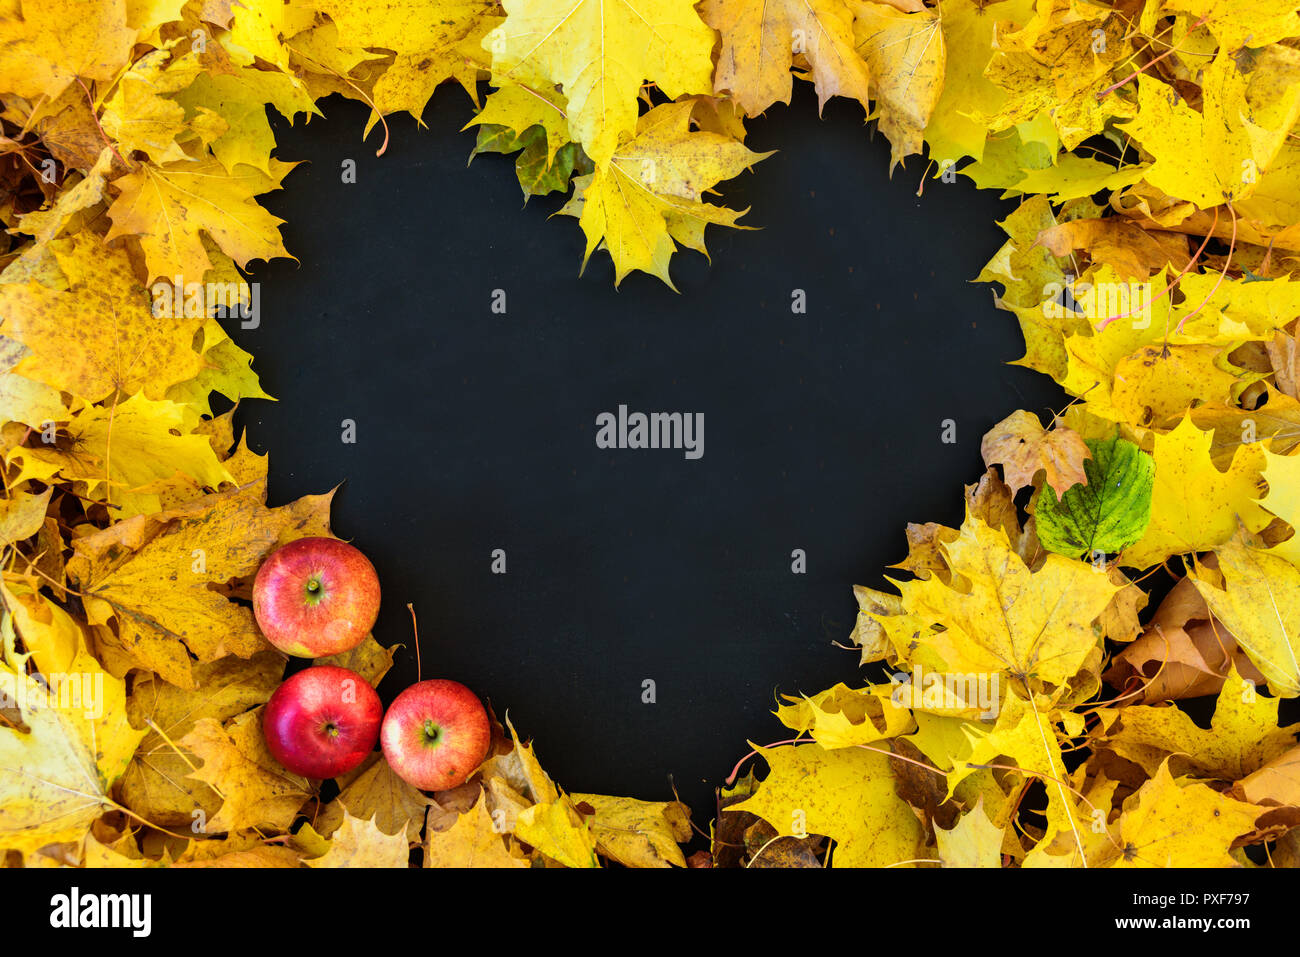 Blackboard with frame of leaves in heart shape. Frame is empty. With apples Stock Photo